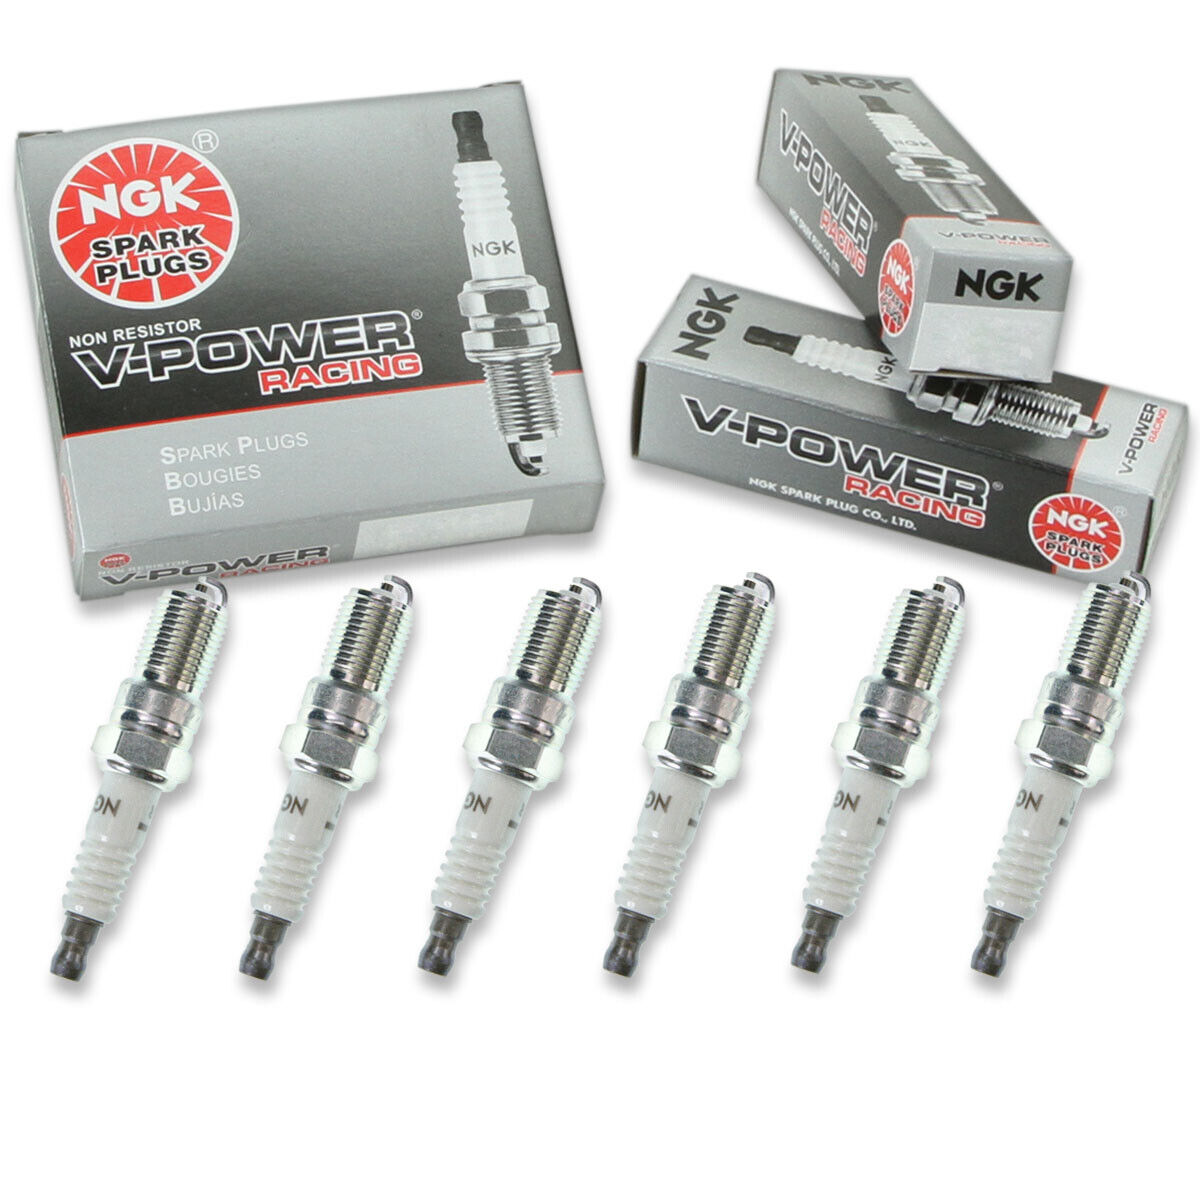 6 pc NGK 7891 R5724-9 V-Power Racing Spark Plugs for S59YC S59C S57C IT27 tj